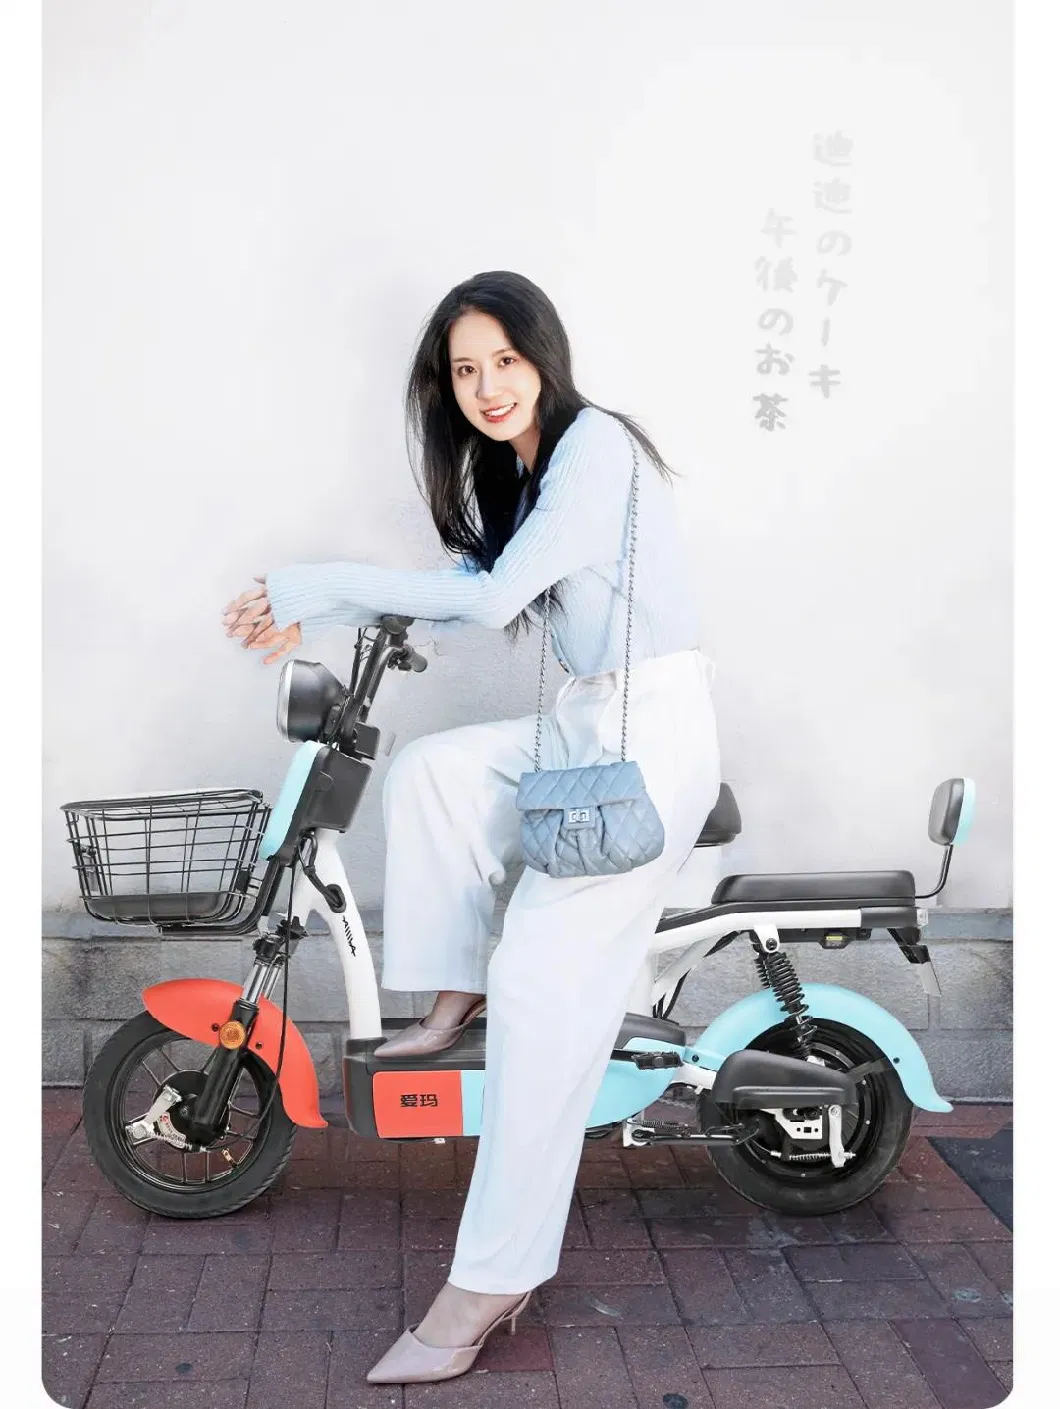 fashion electric bike scooter with beautiful colours with 48v battery